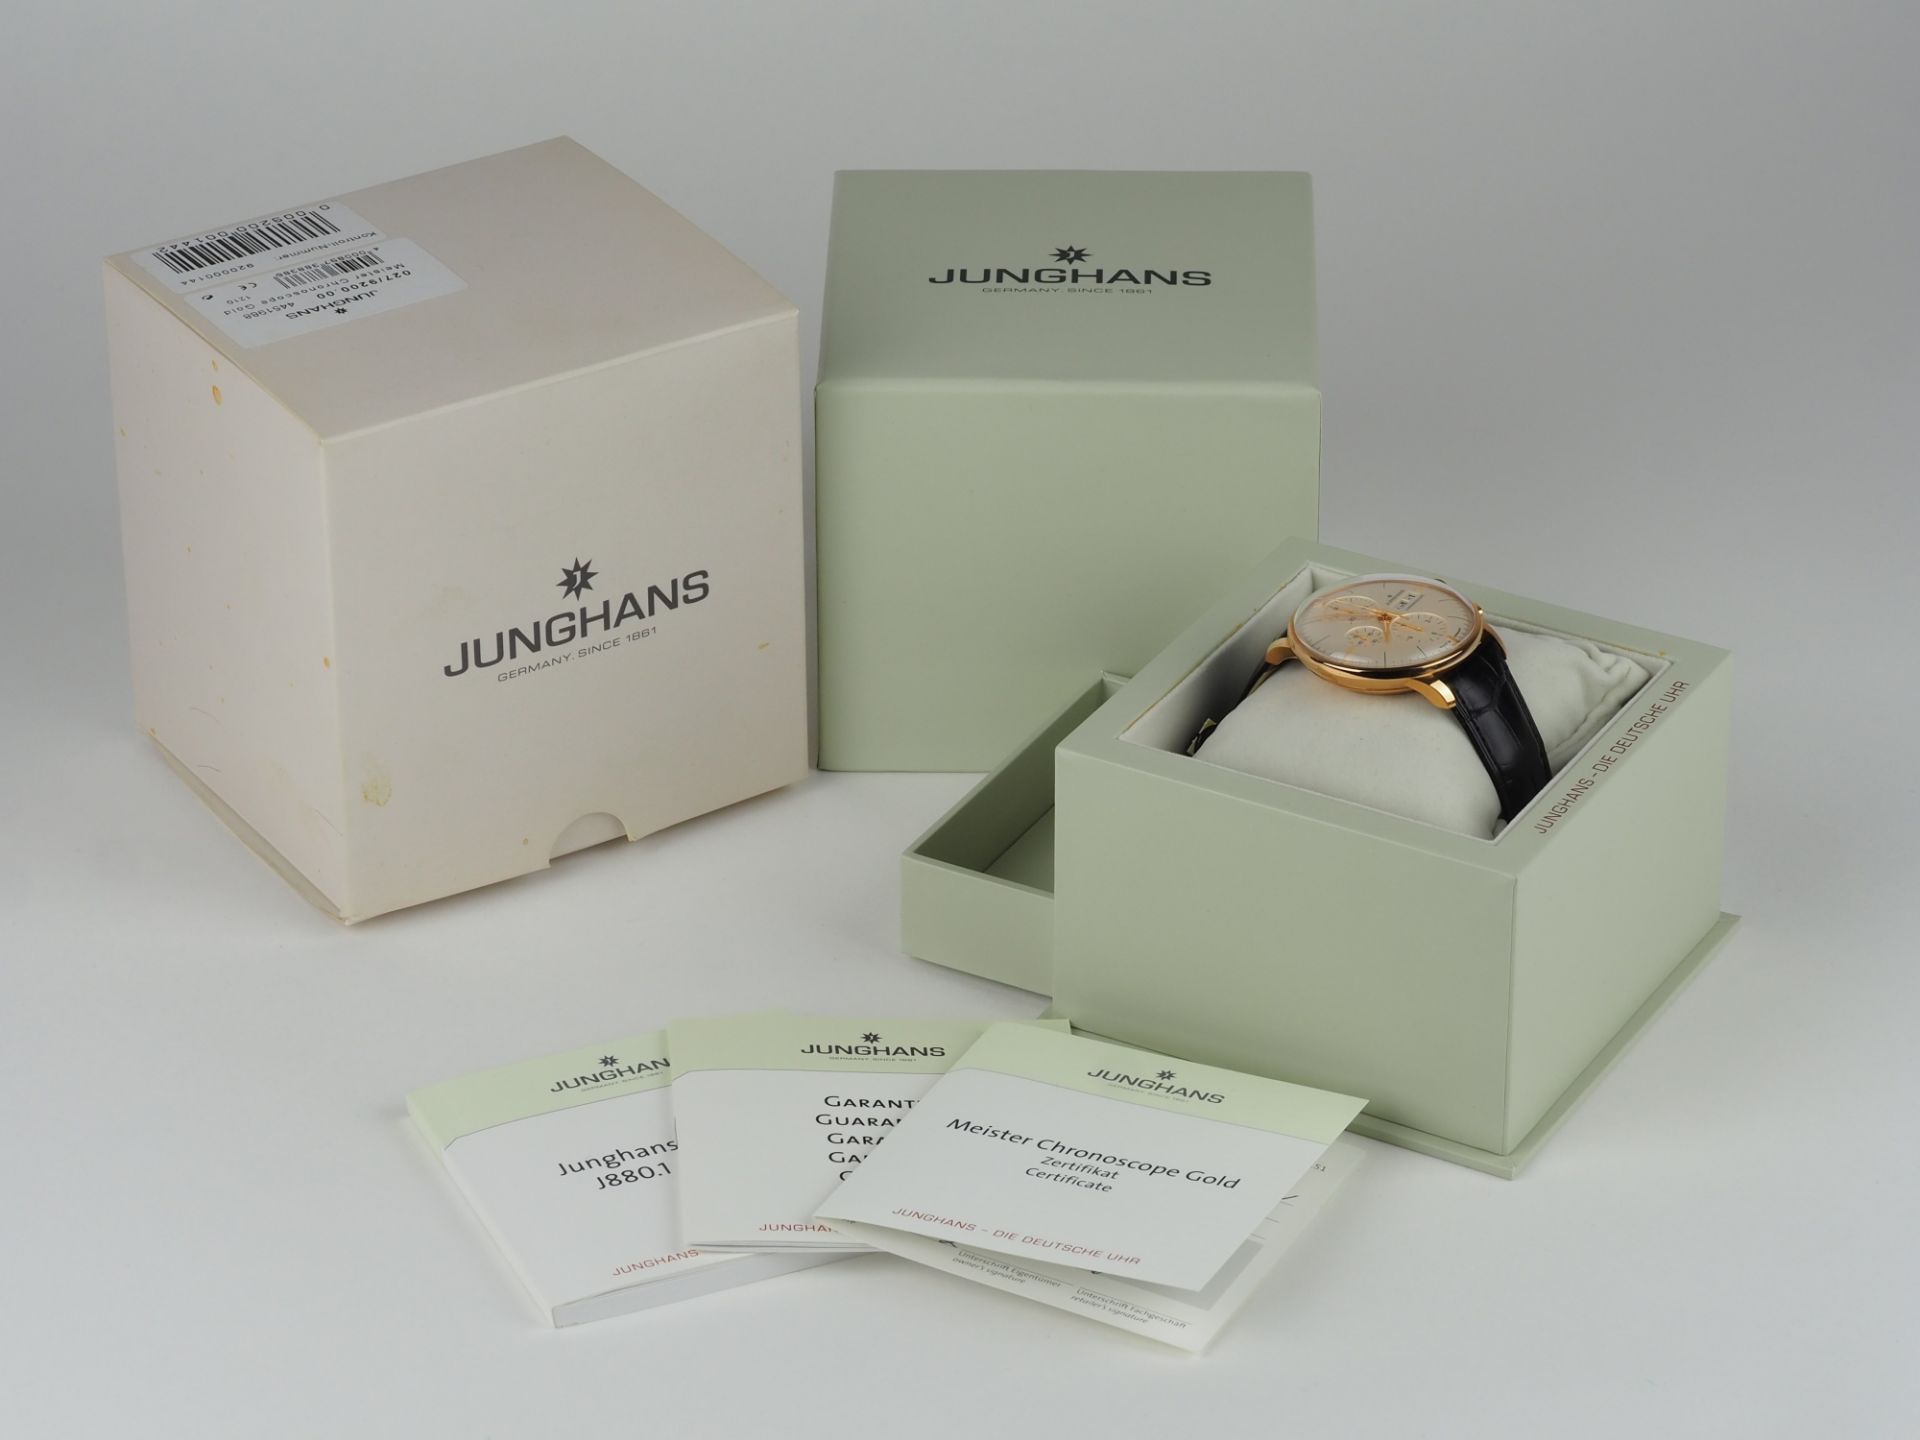 Junghans Meister Chronoscope Gold, Limited Edition 144/151, unworn. - Image 5 of 5